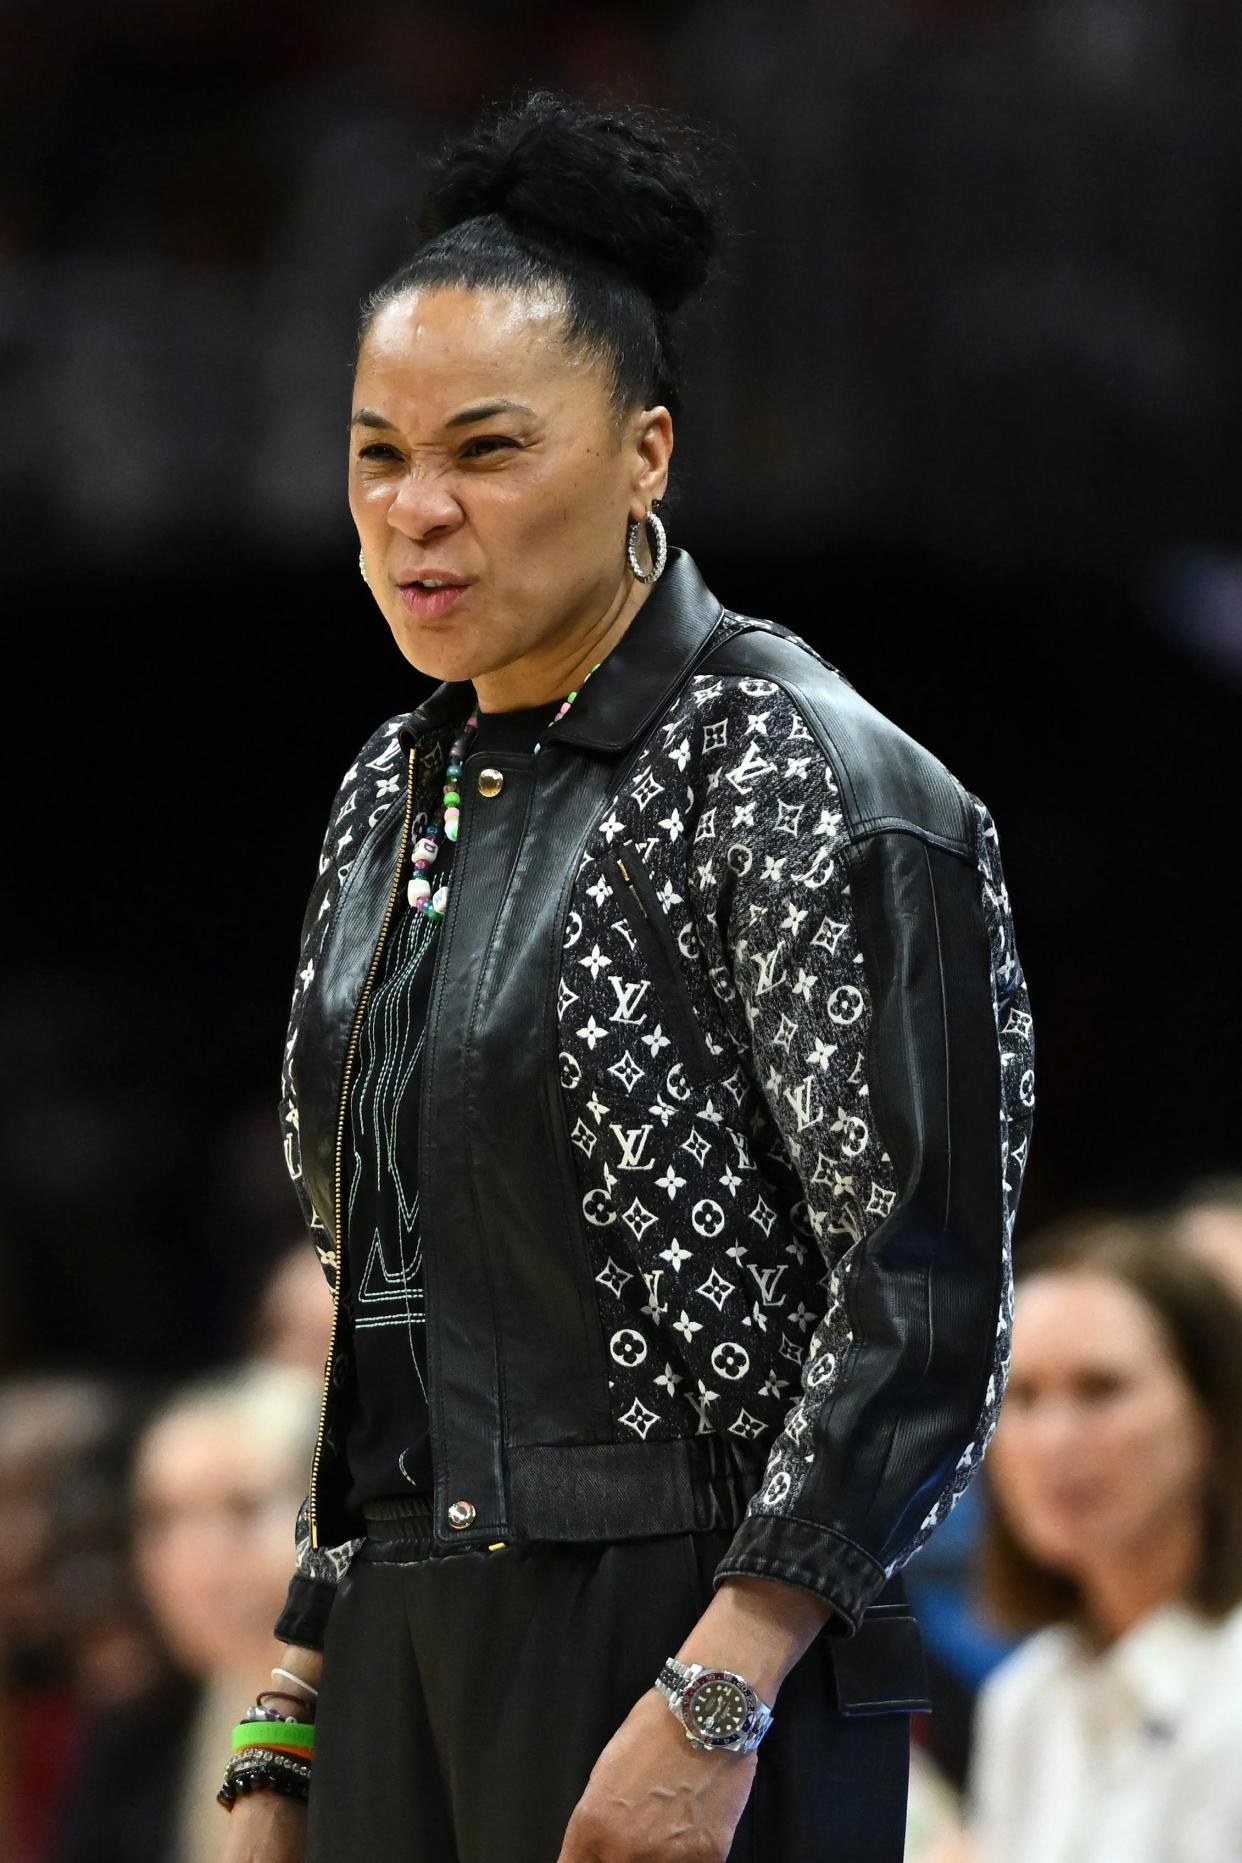 South Carolina head coach Dawn Staley reacts during Friday's national semifinal game against North Carolina State.